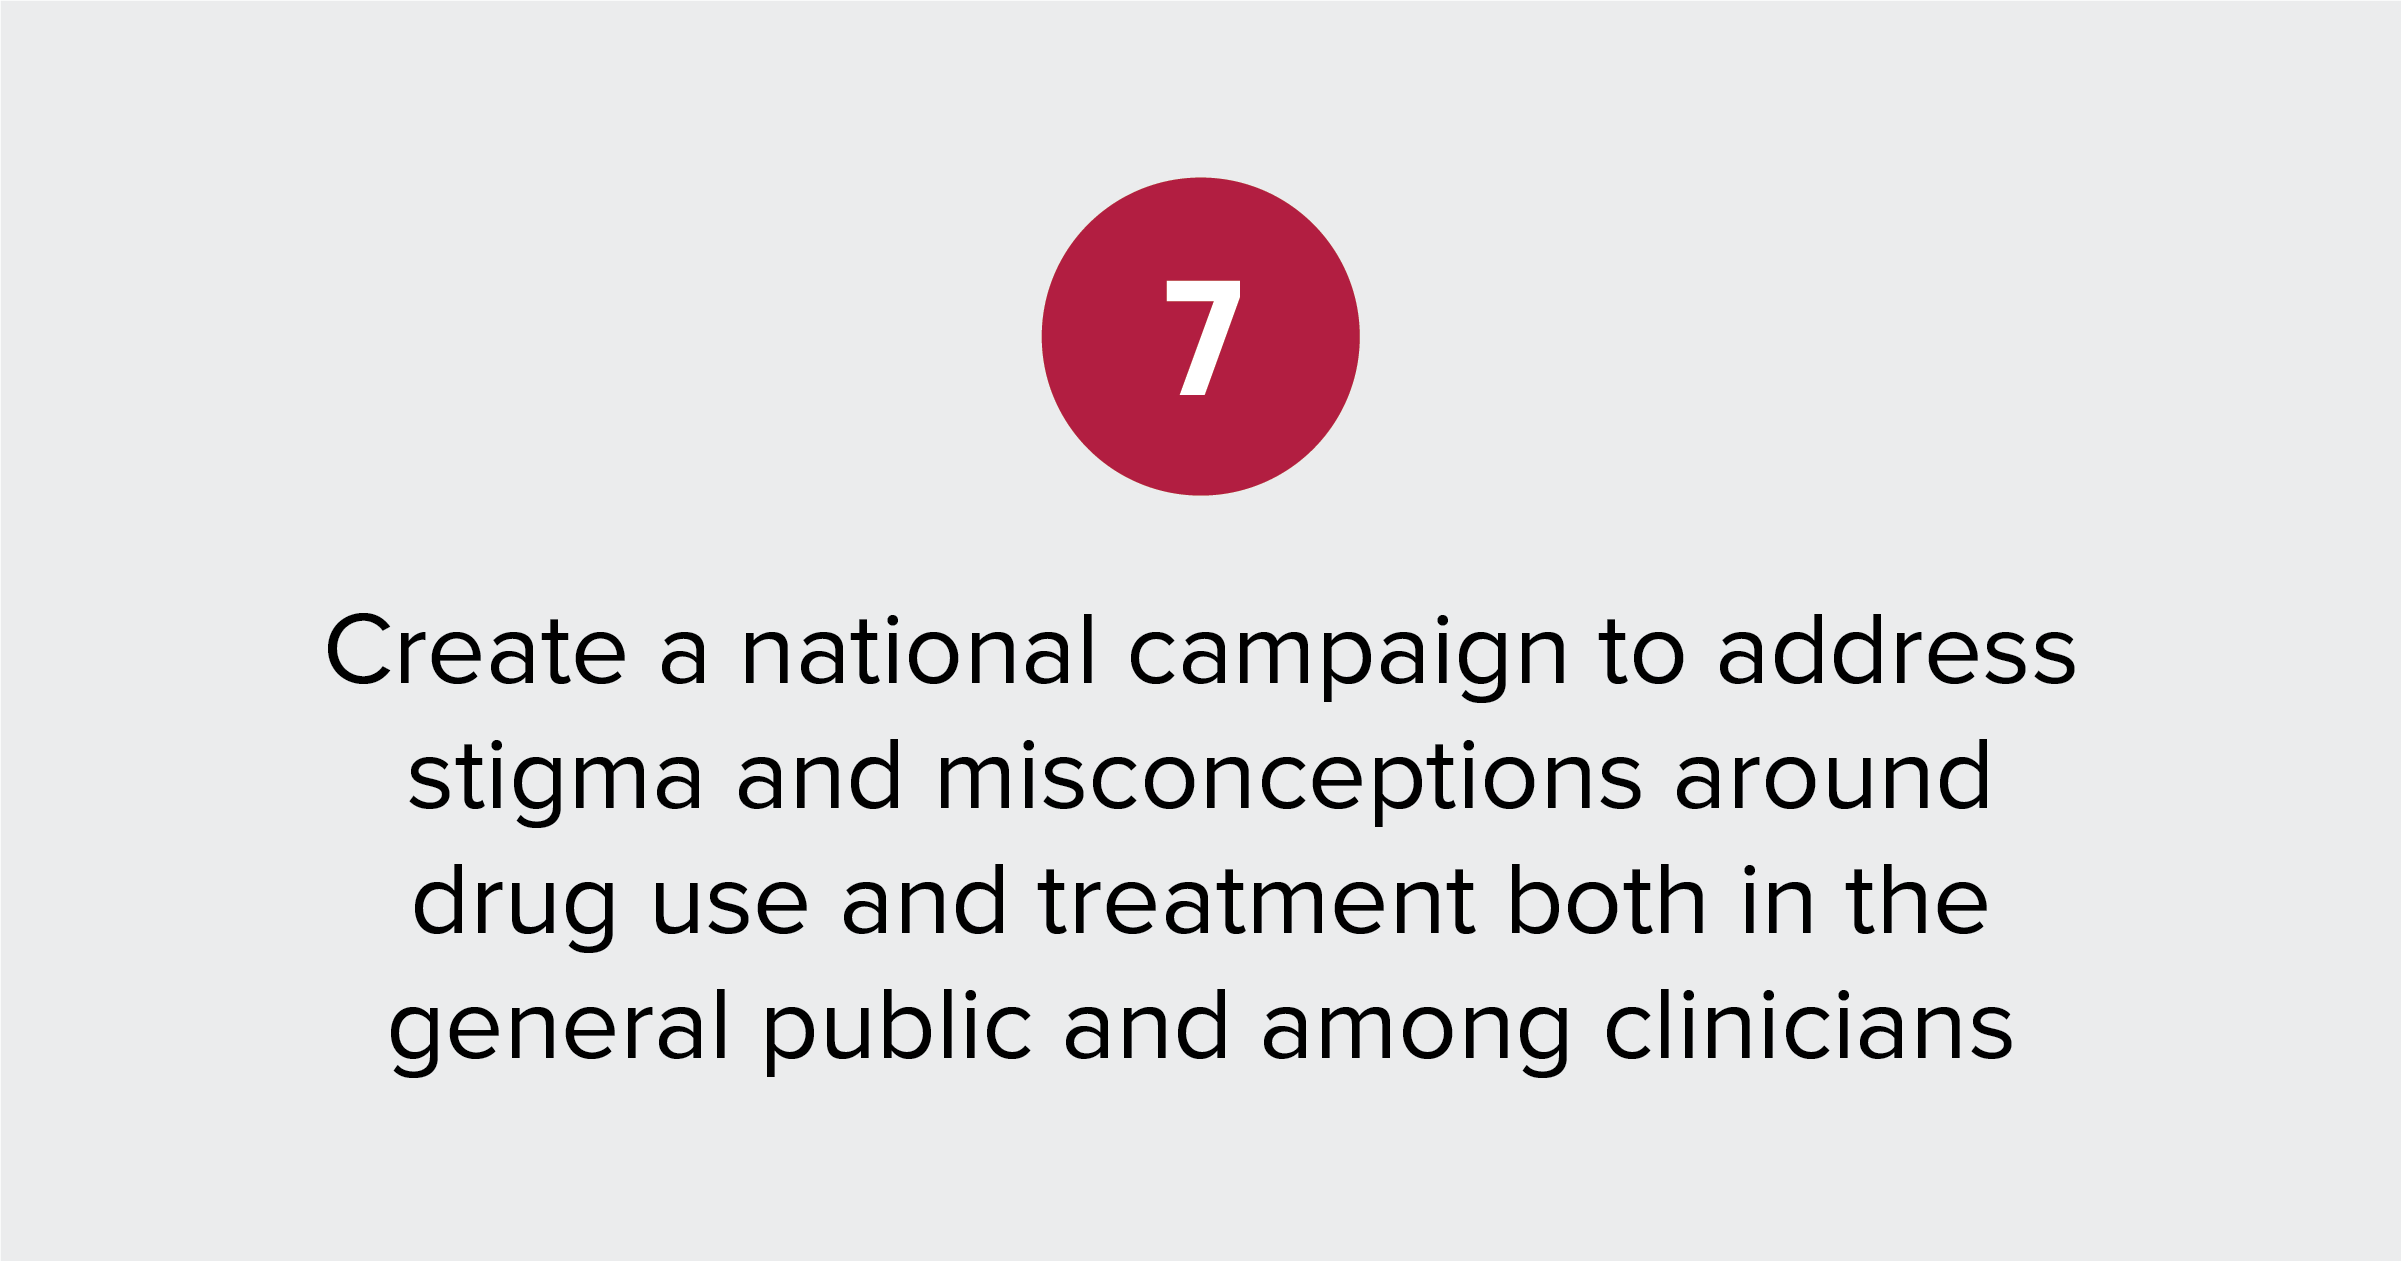 Text of report recommendation 7: Create a national campaign to address stigma and misconceptions around drug use and treatment both in the general public and among clinicians